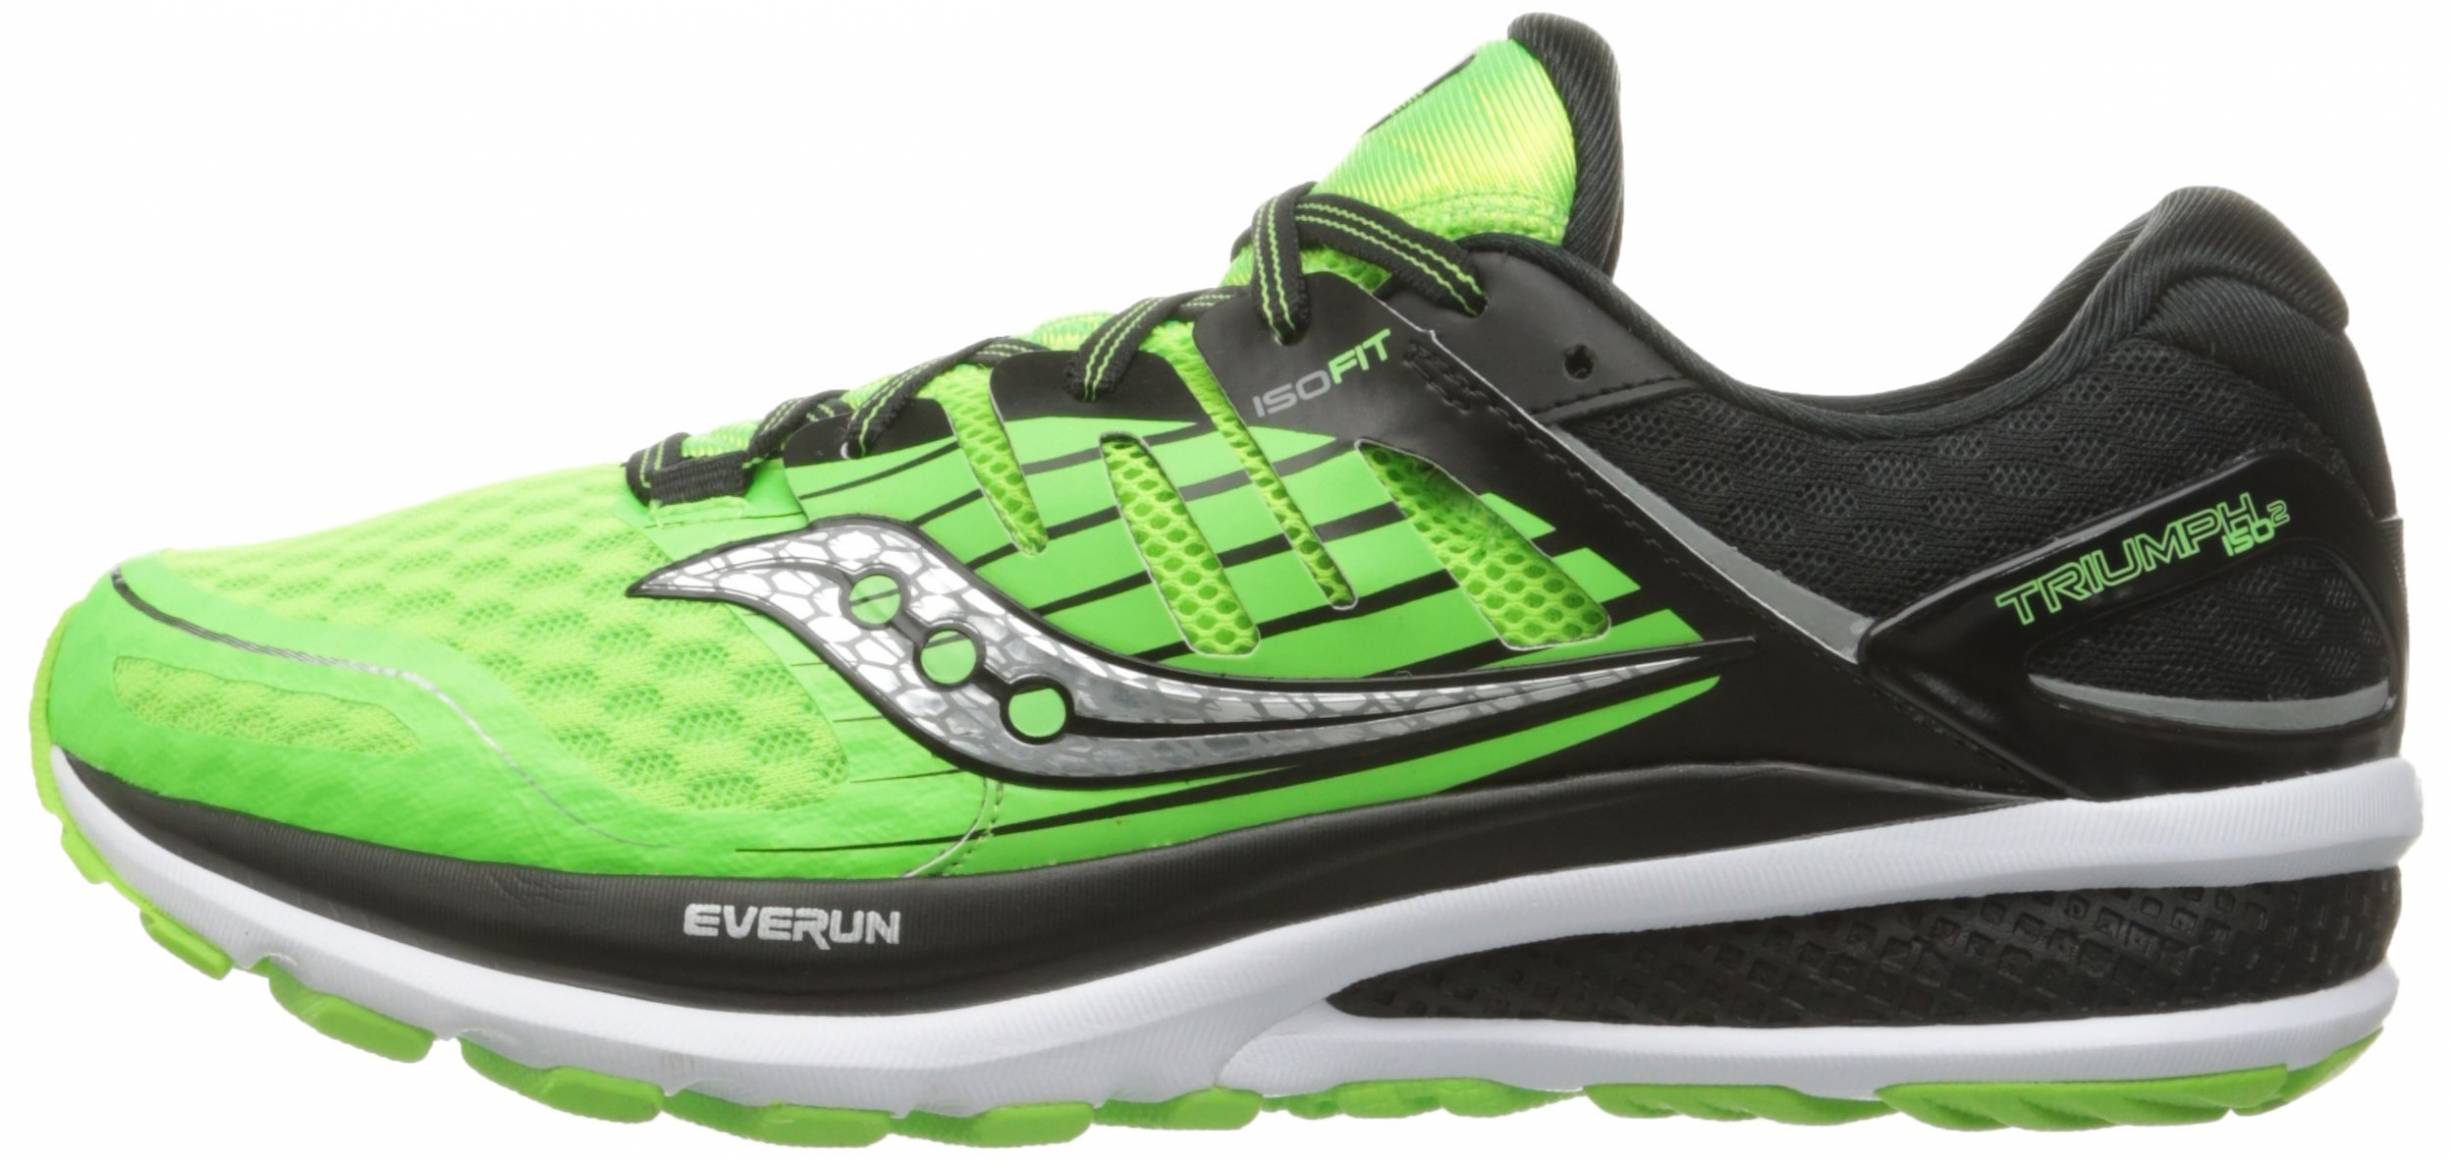 Saucony Triumph ISO 2 Review 2022, Facts, Deals ($106) | RunRepeat